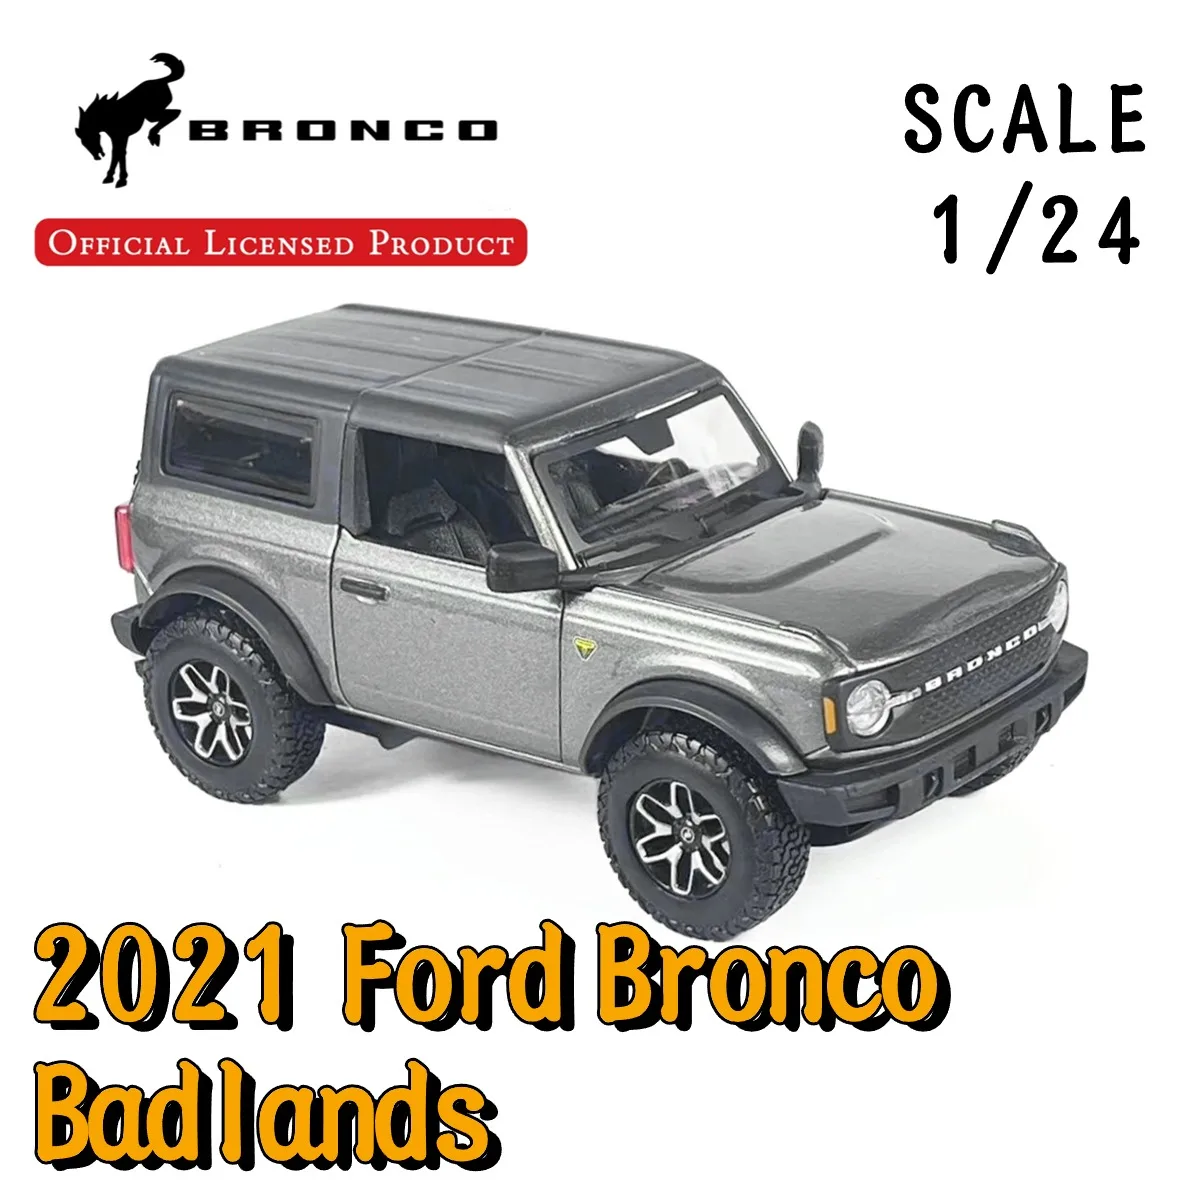 

1:24 2021 Ford Bronco Badlands Replica Car Model Official Licensed Scale Diecast Vehicle Miniature Art Kid Boy Xmas Gift Toy